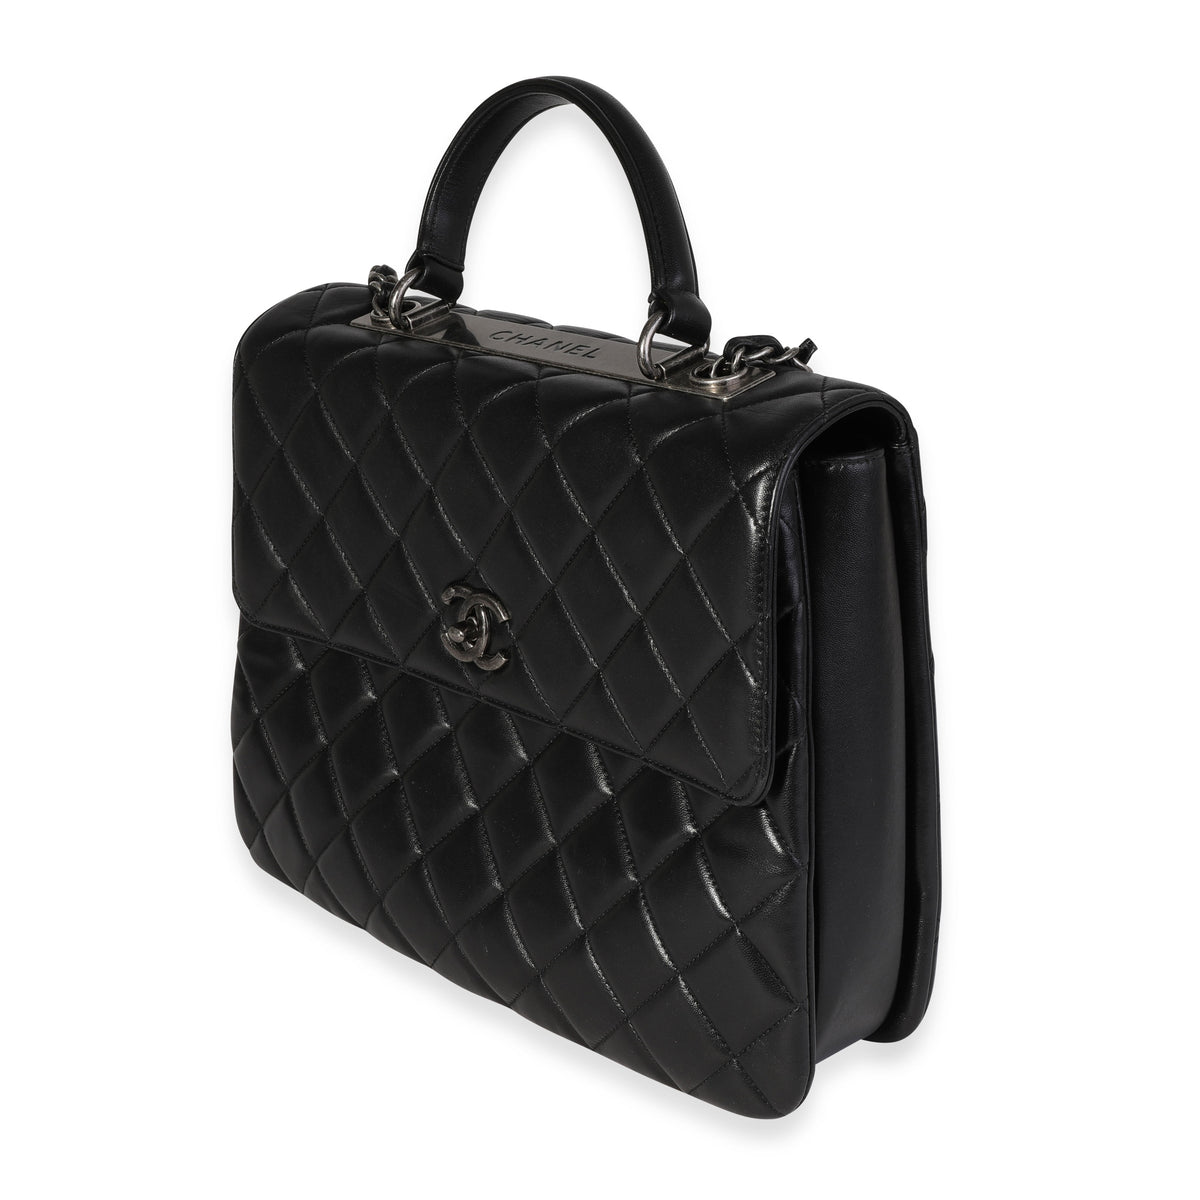 Chanel Black Quilted Lambskin Large Trendy Top Handle Bag